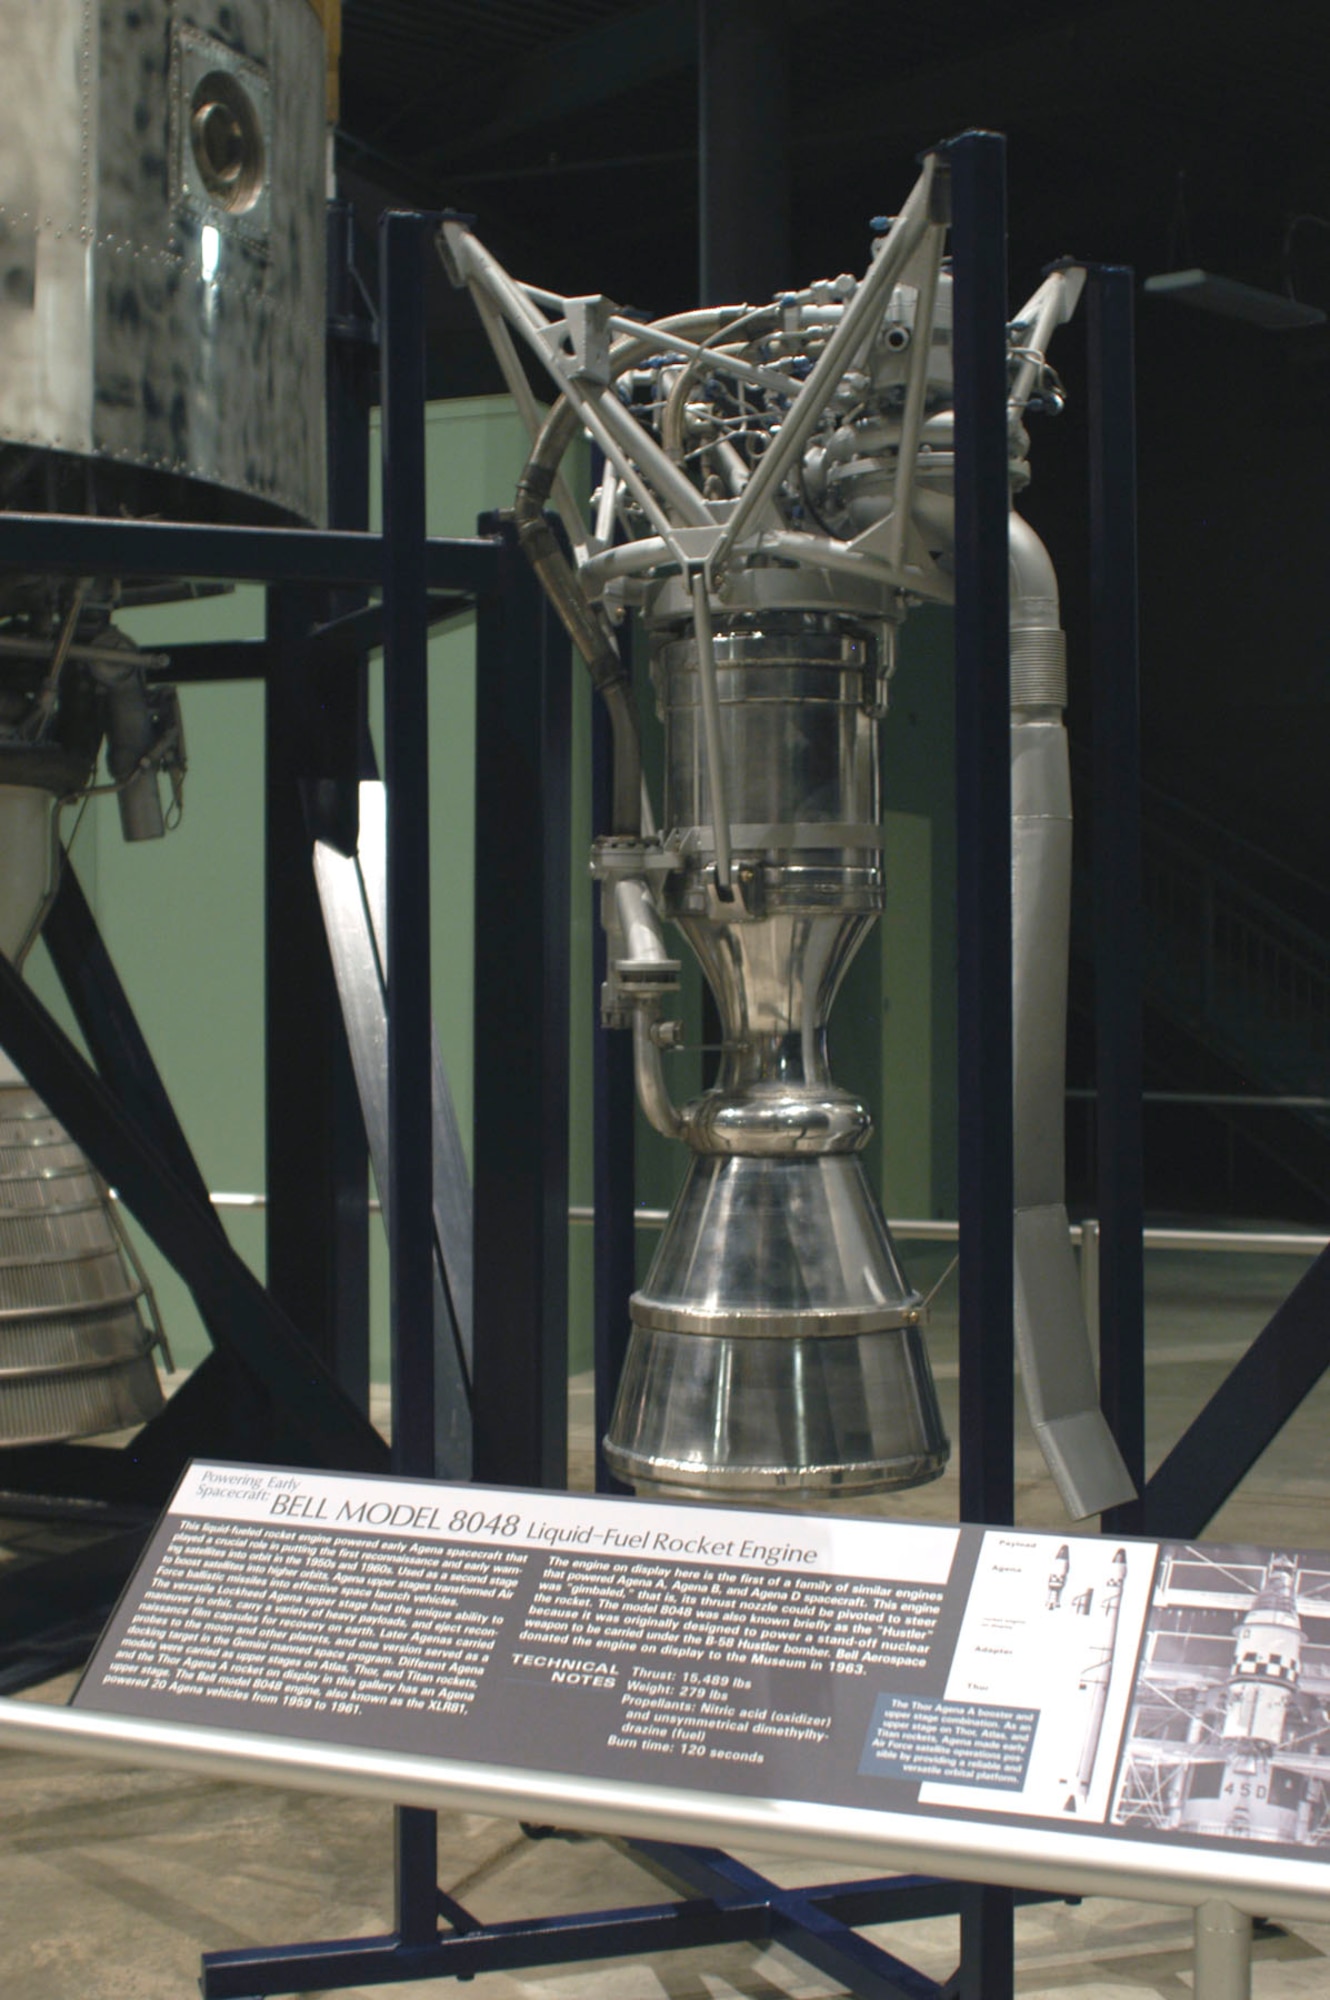 DAYTON, Ohio -- Bell Model 8048 liquid-fuel engine on display in the Missile & Space Gallery at the National Museum of the United States Air Force. (U.S. Air Force photo)